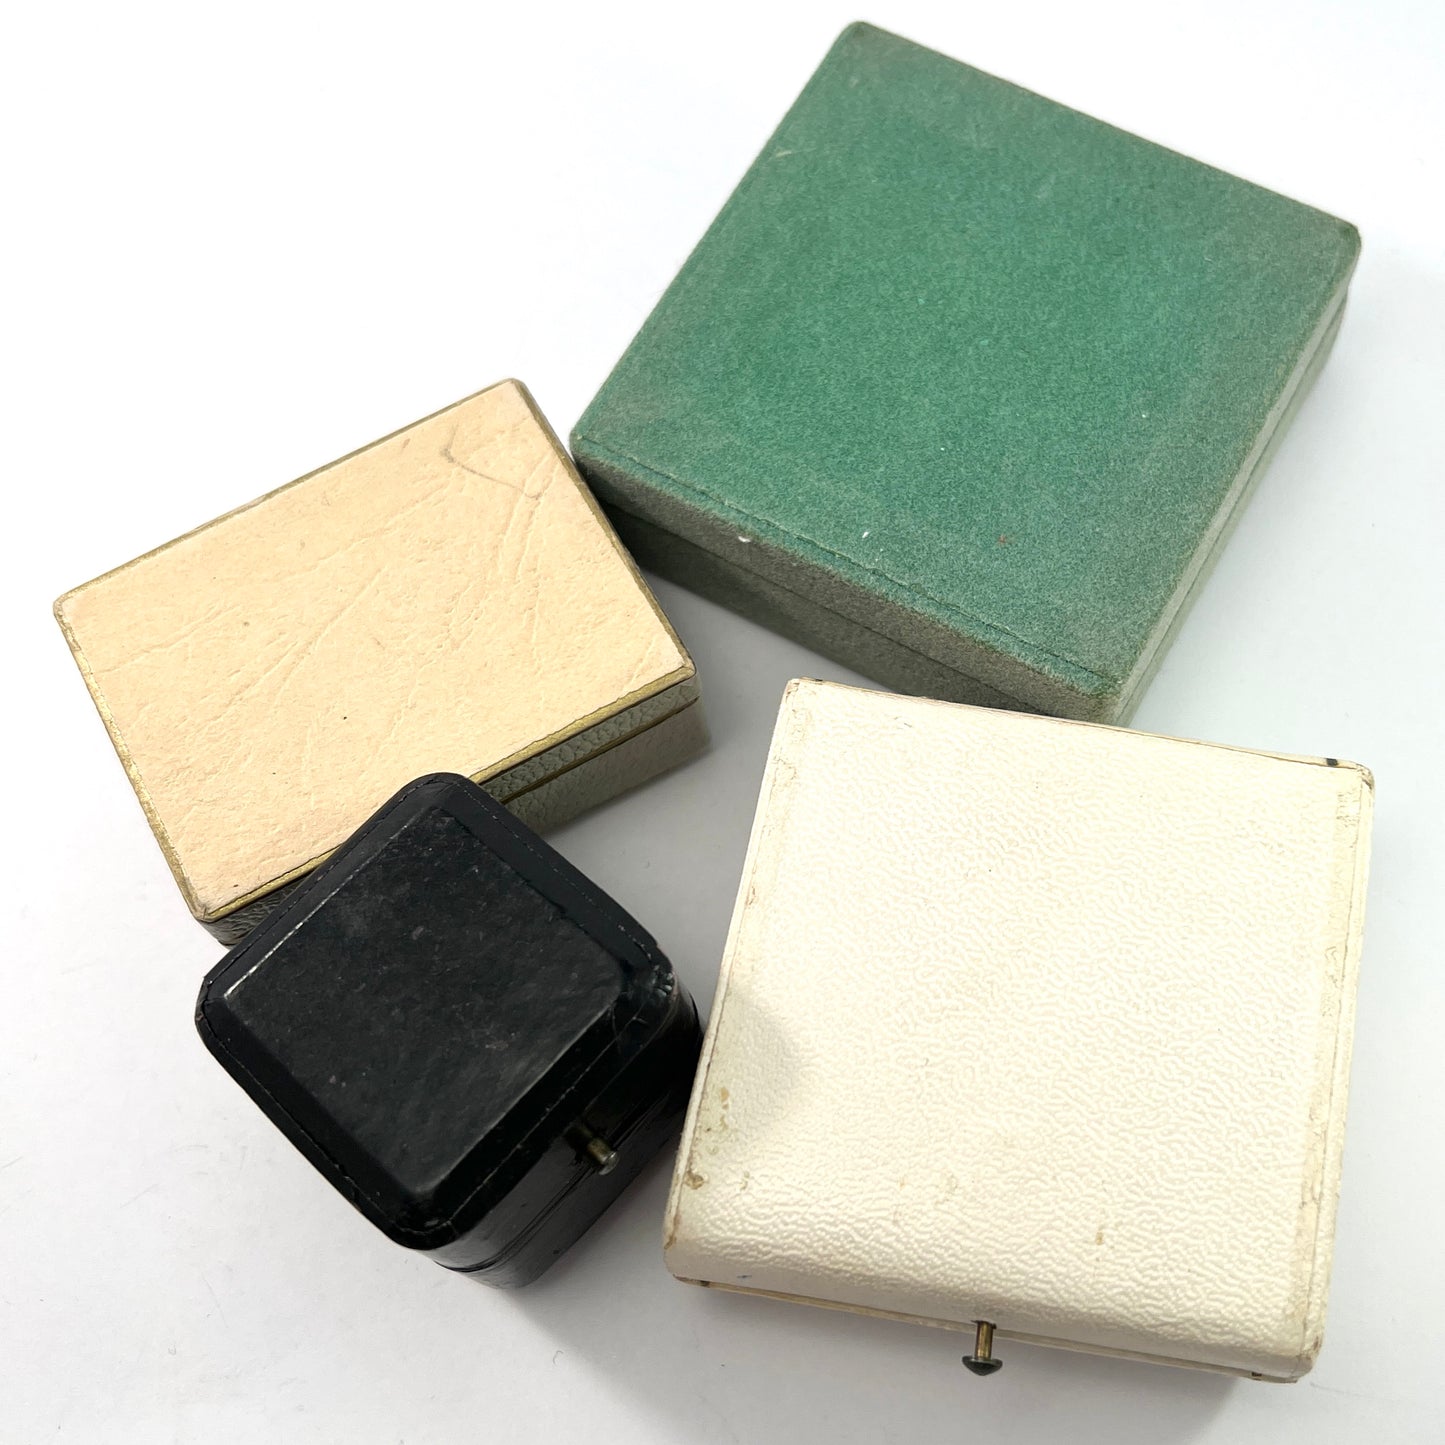 4 Vintage and Antique Jewelry Display Presentation Storage Boxes. Ring Brooch Earrings